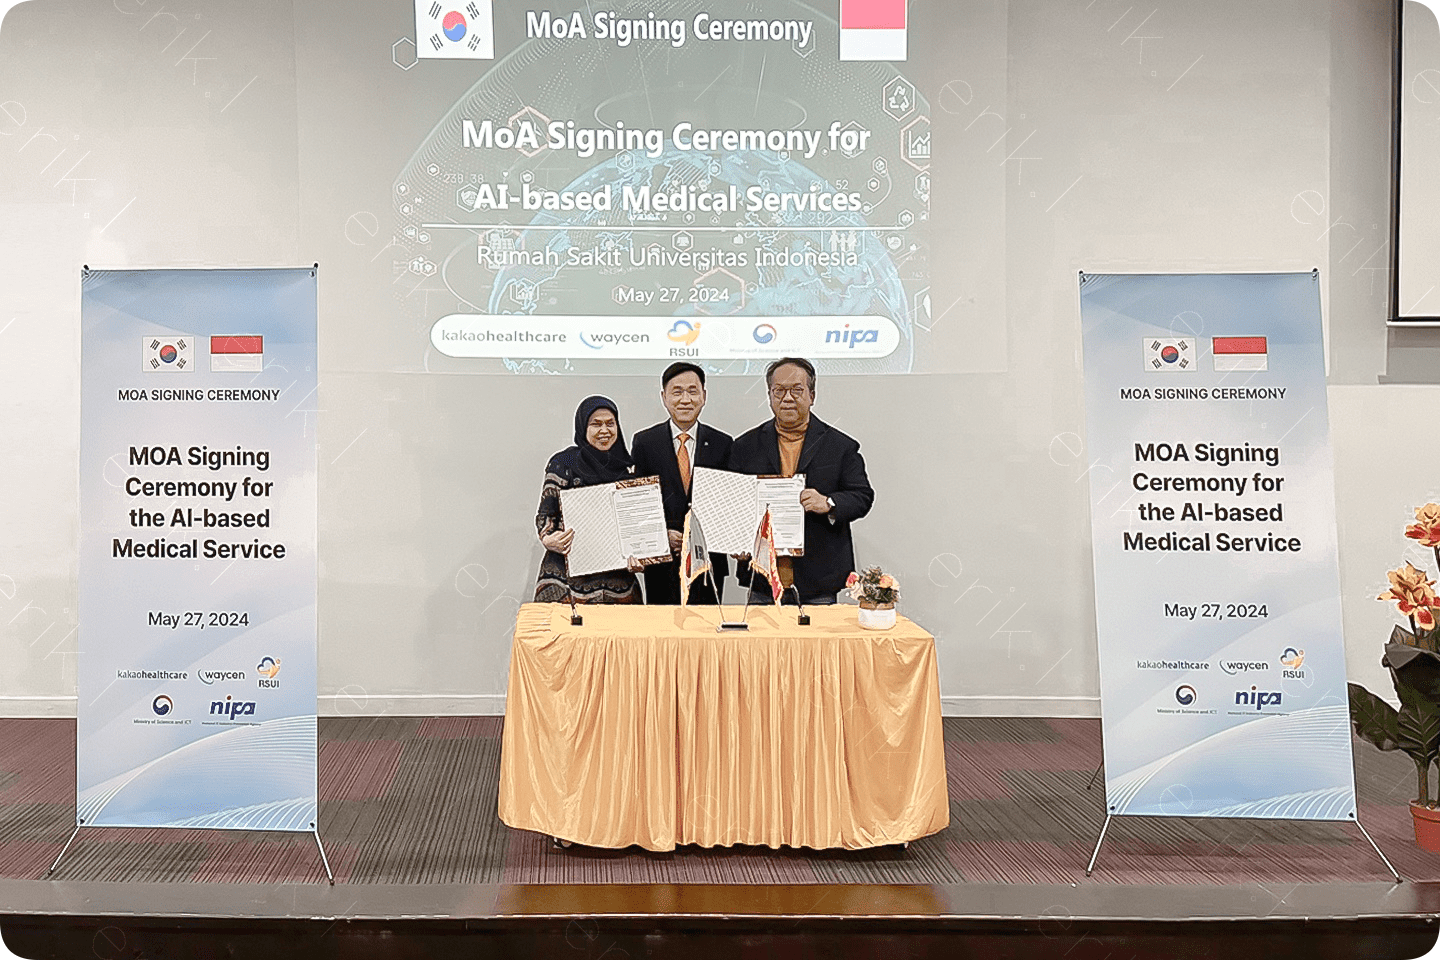 Signing ceremony with KakaoHealthcare and RSUI for AI-based medical services